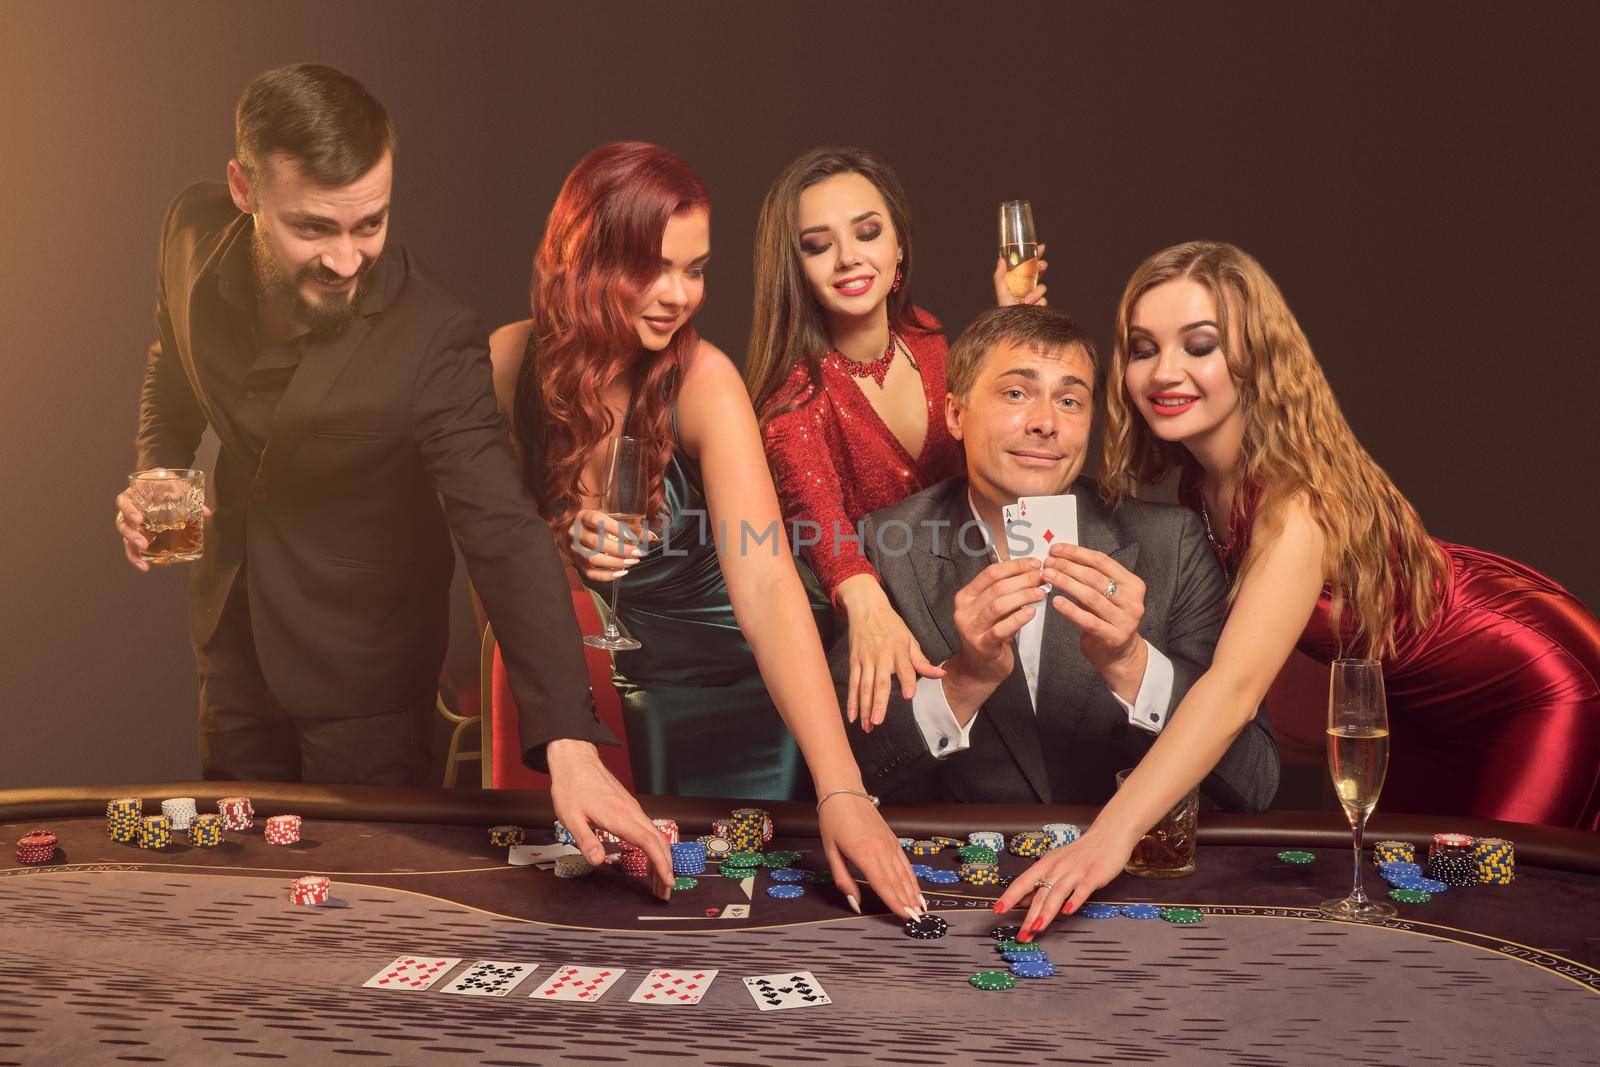 Funny colleagues are playing poker at casino. They are celebrating their win, smiling and looking vey excited while posing at the table against a dark smoke background in a ray of a spotlight. Cards, chips, money, alcohol, gambling, entertainment concept.